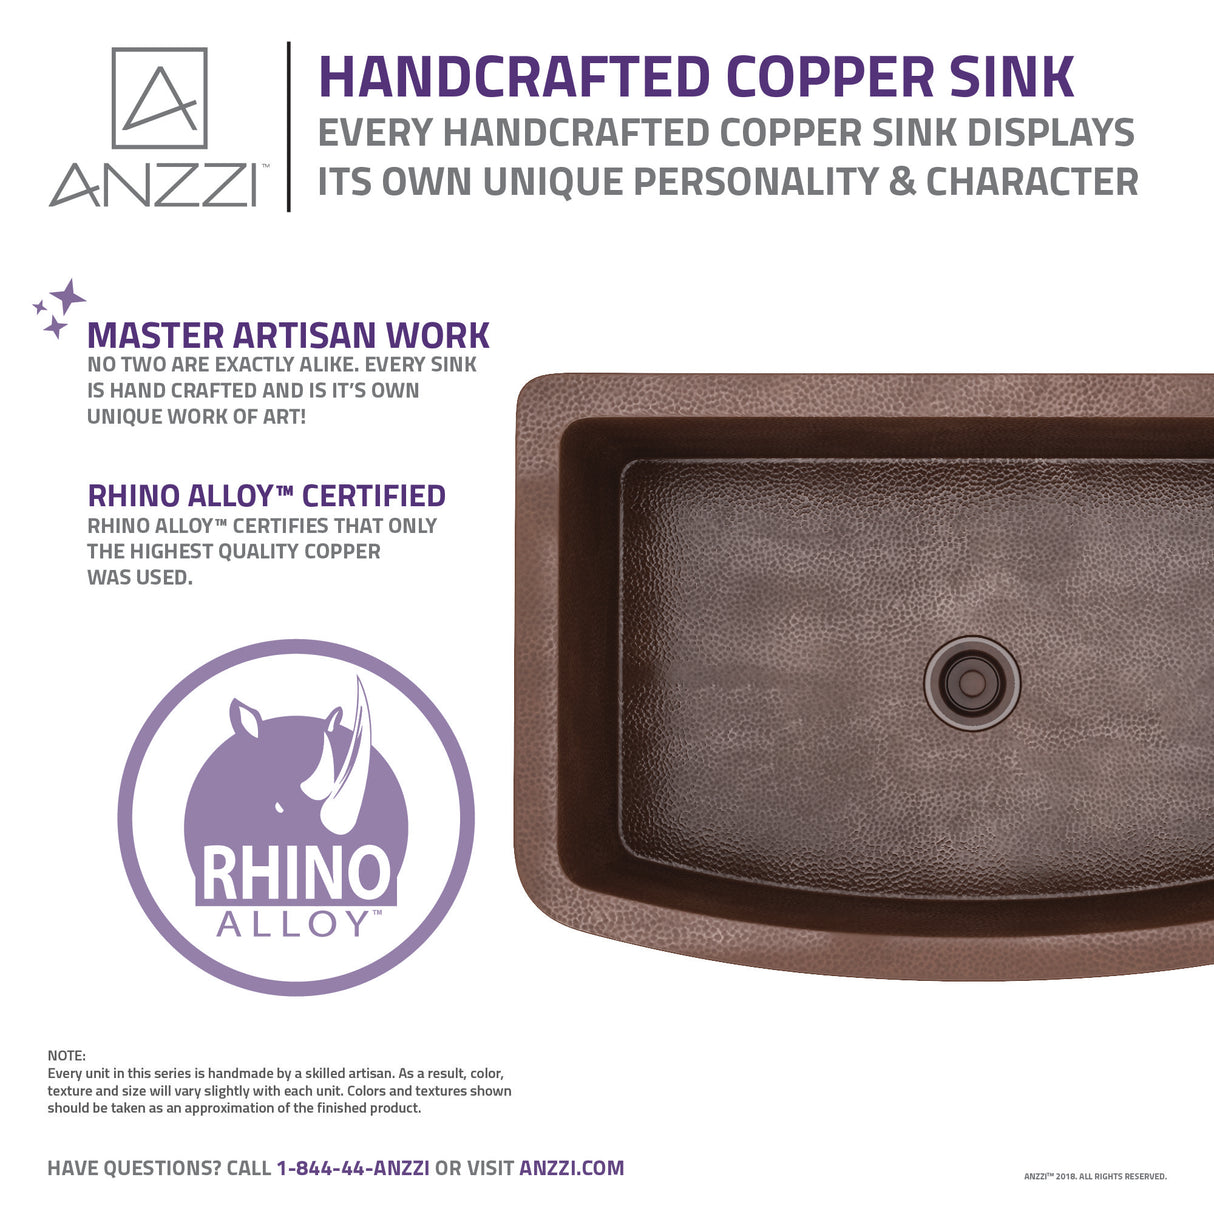 ANZZI SK-006 Pieria Farmhouse Handmade Copper 33 in. 0-Hole Single Bowl Kitchen Sink in Hammered Antique Copper